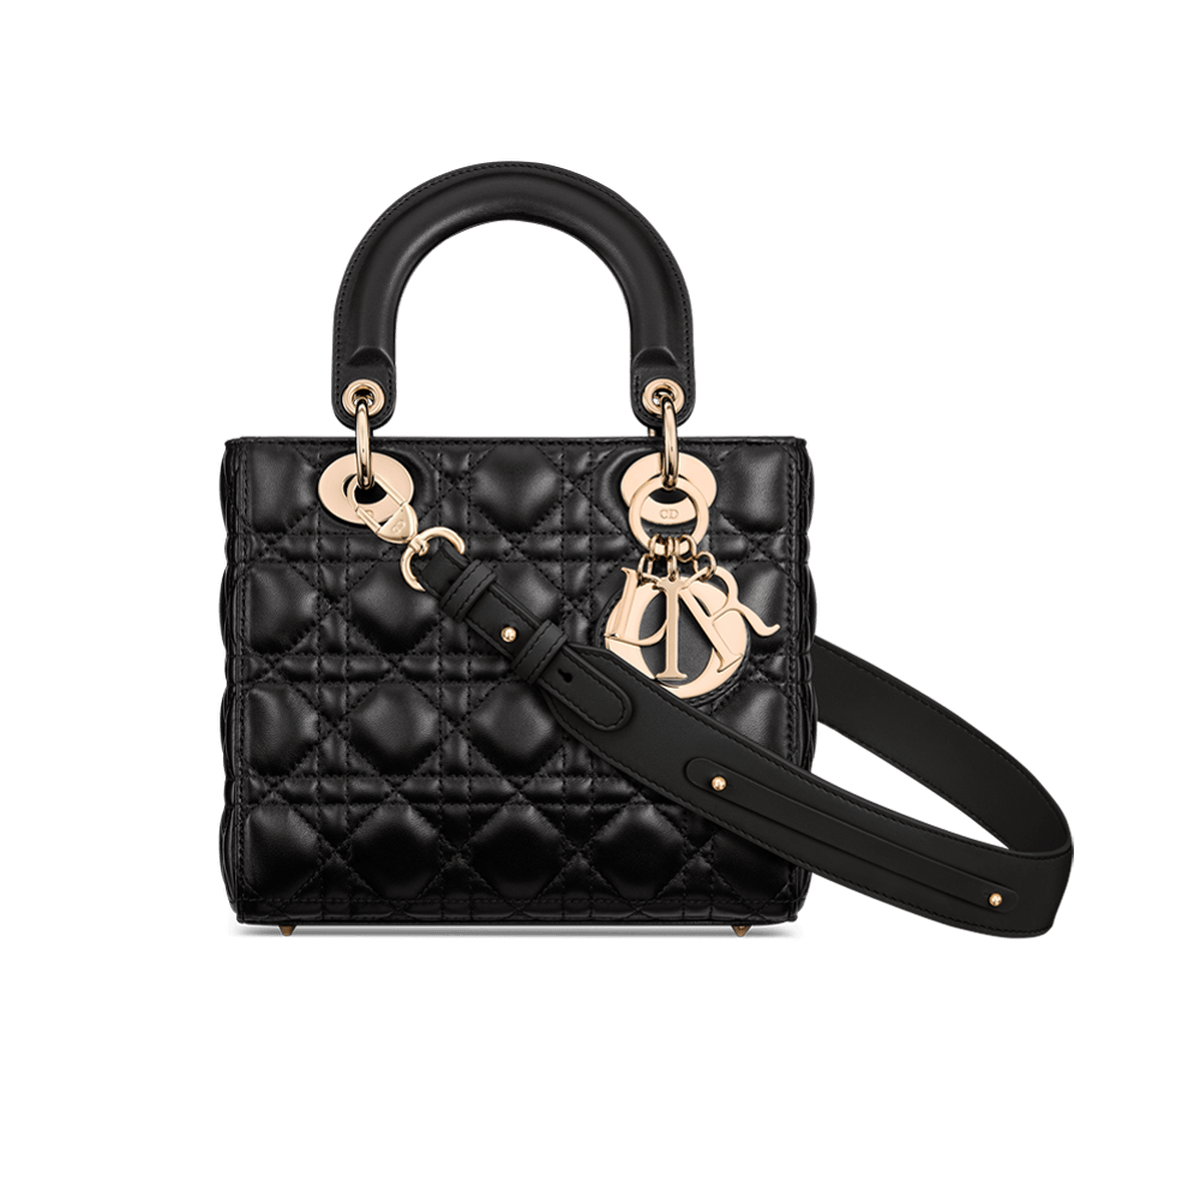 A black quilted leather handbag with gold-tone hardware, featuring a top handle, a detachable shoulder strap, and decorative charms.